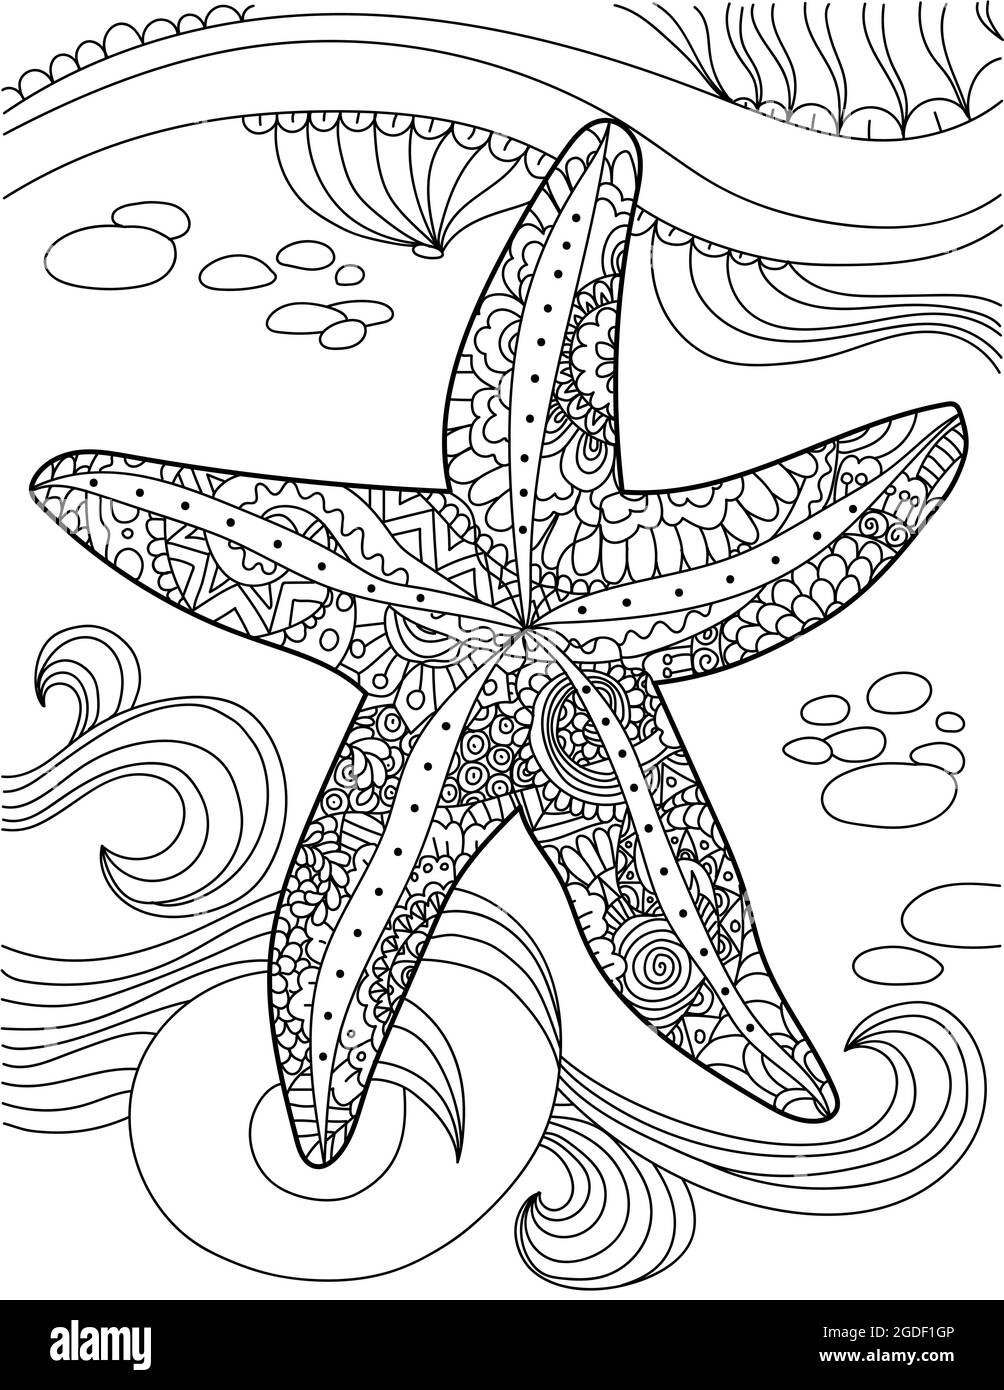 Seashell line art coloring book black and white stock photos images